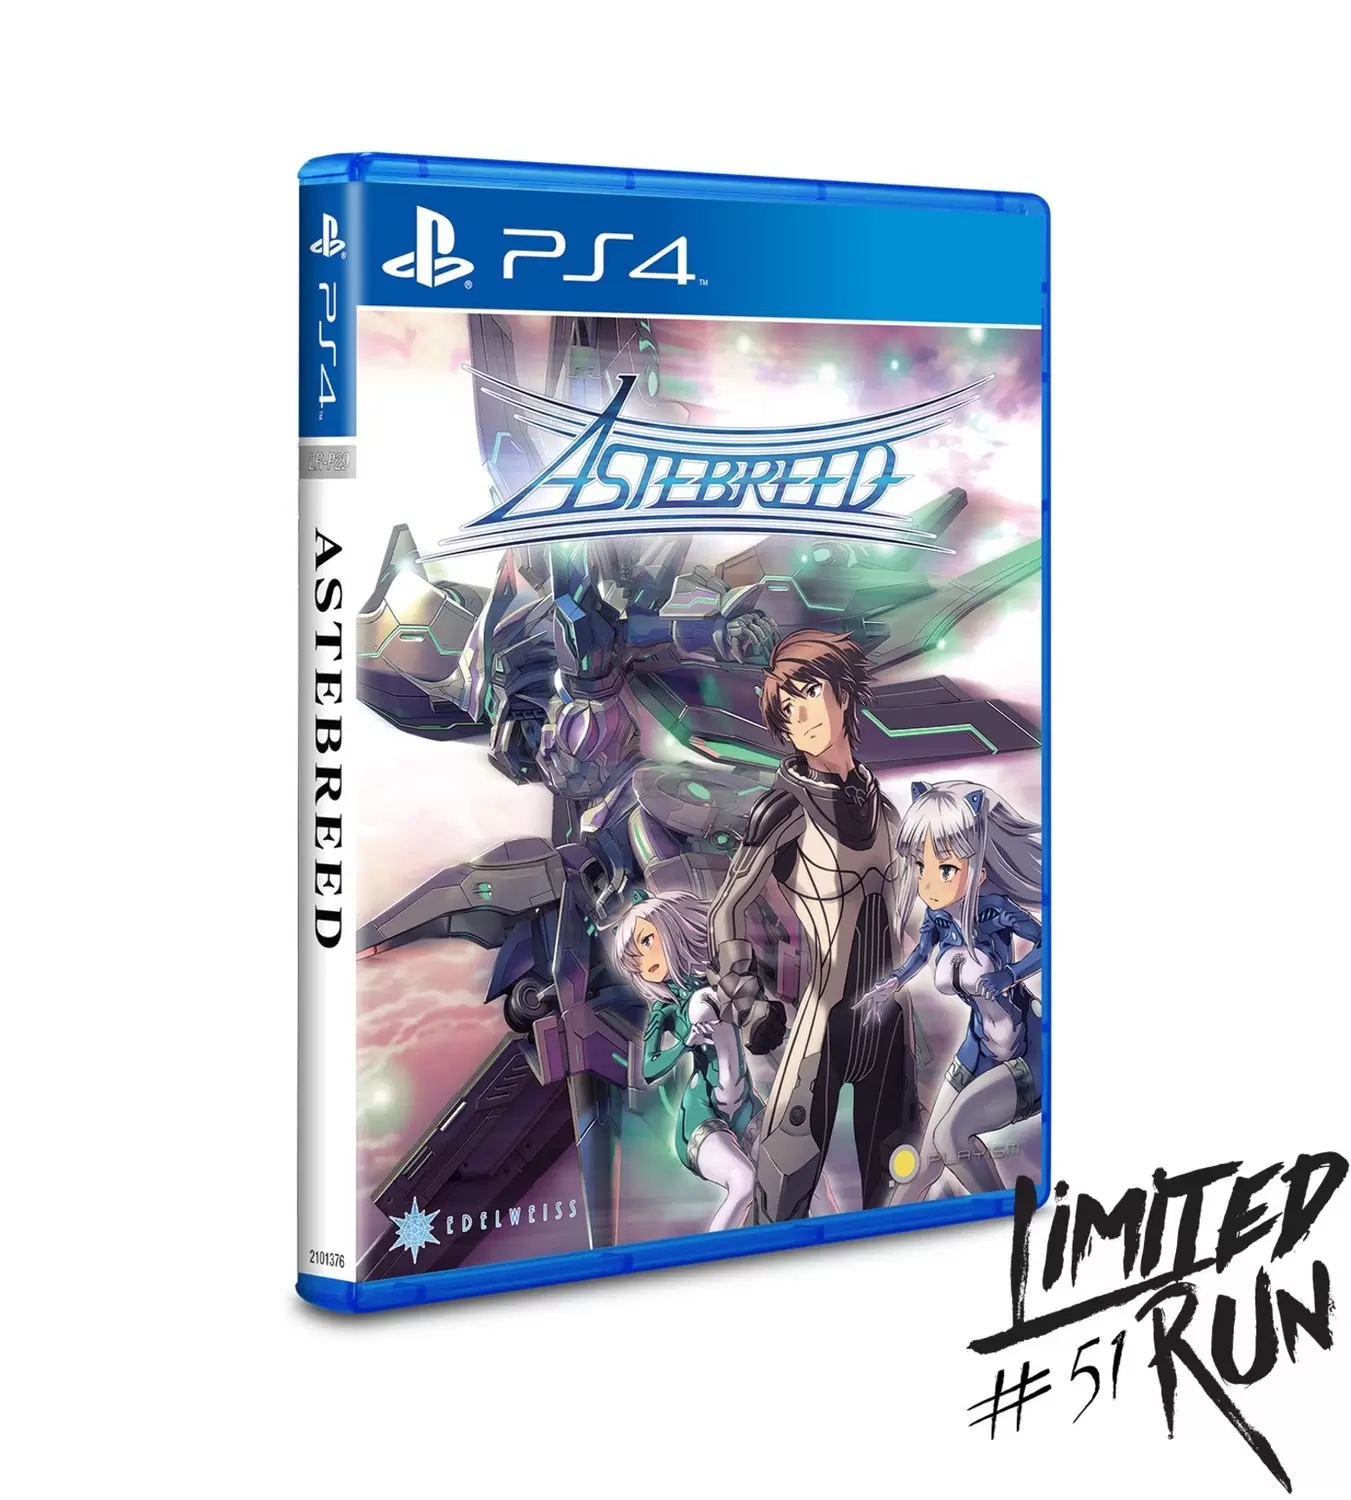 PS4 Games - Astebreed